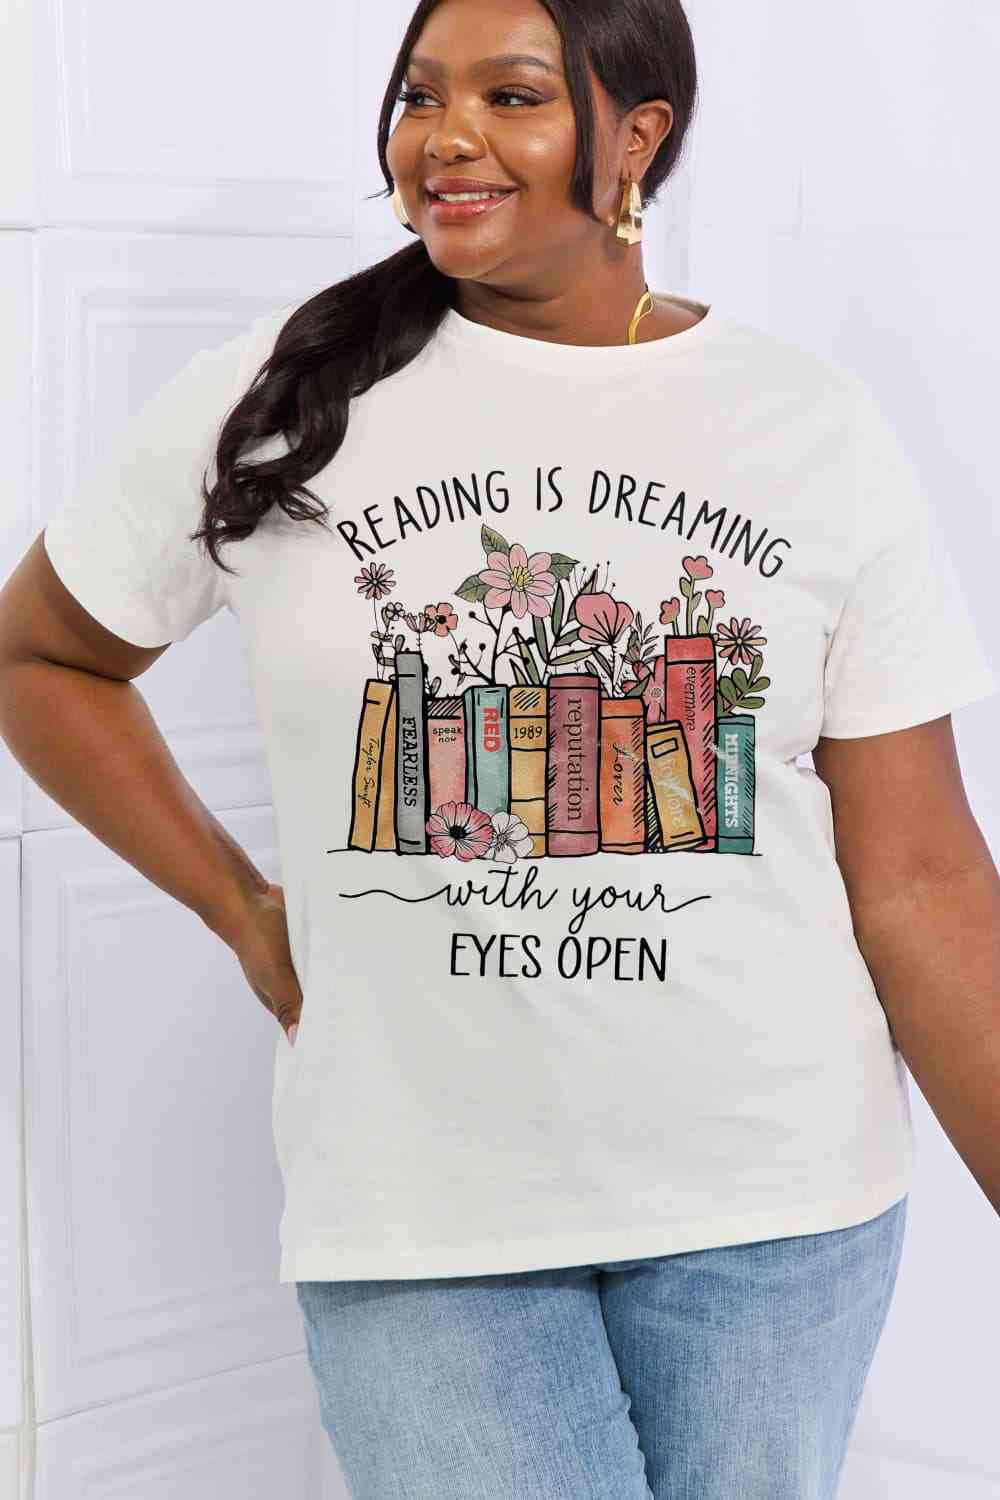 READING IS DREAMING WITH YOUR EYES OPEN Graphic Cotton Tee - T-Shirts - Shirts & Tops - 11 - 2024